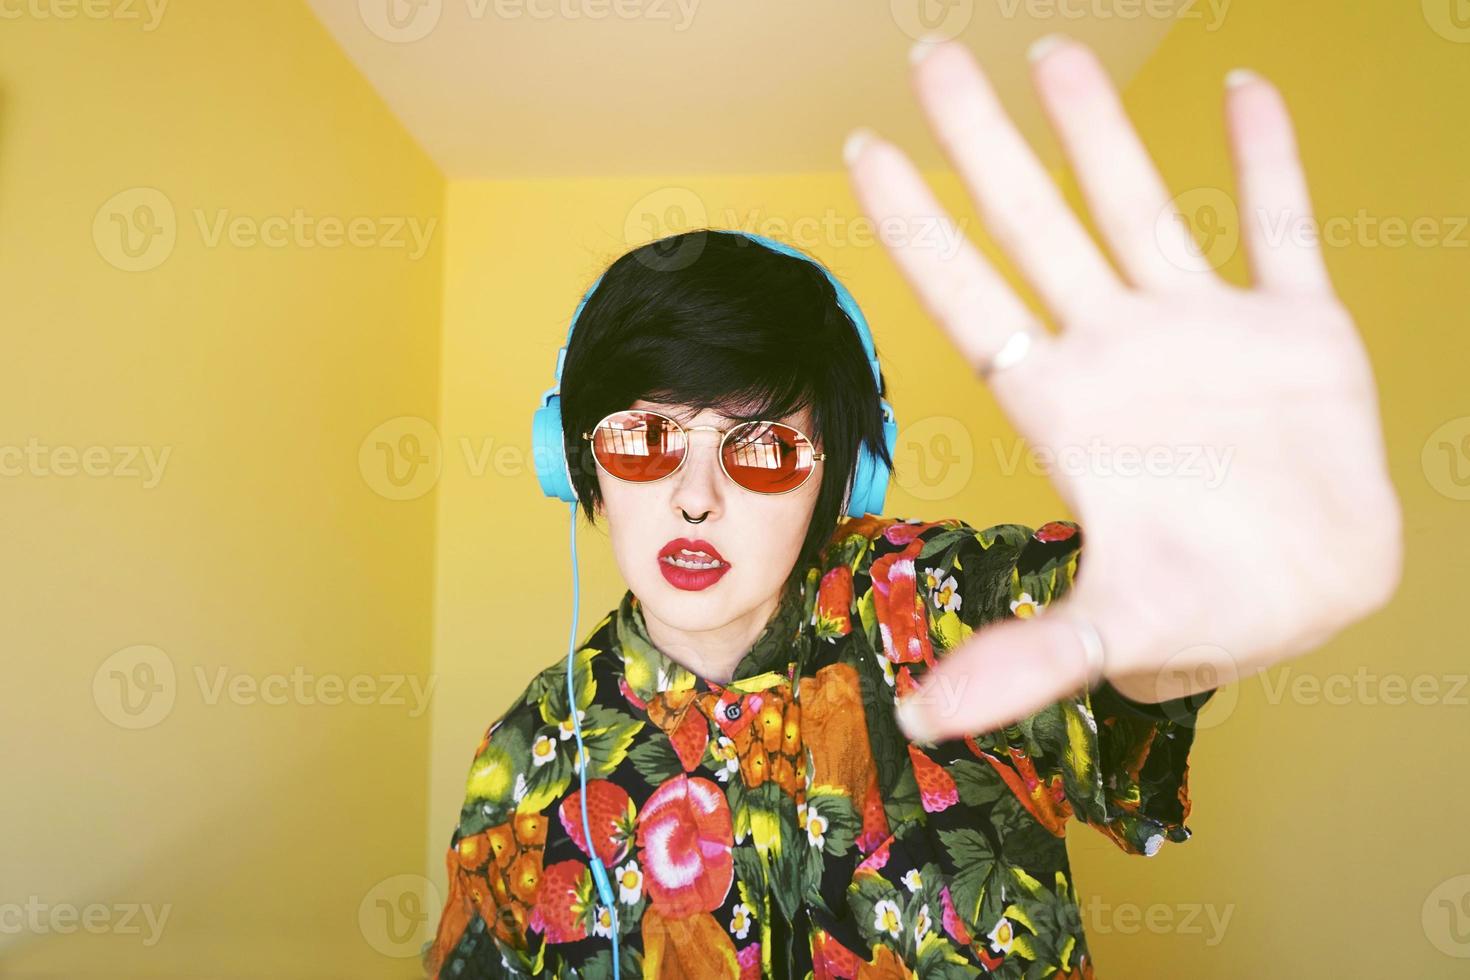 Cool androgynous dj woman in vibrant colors photo